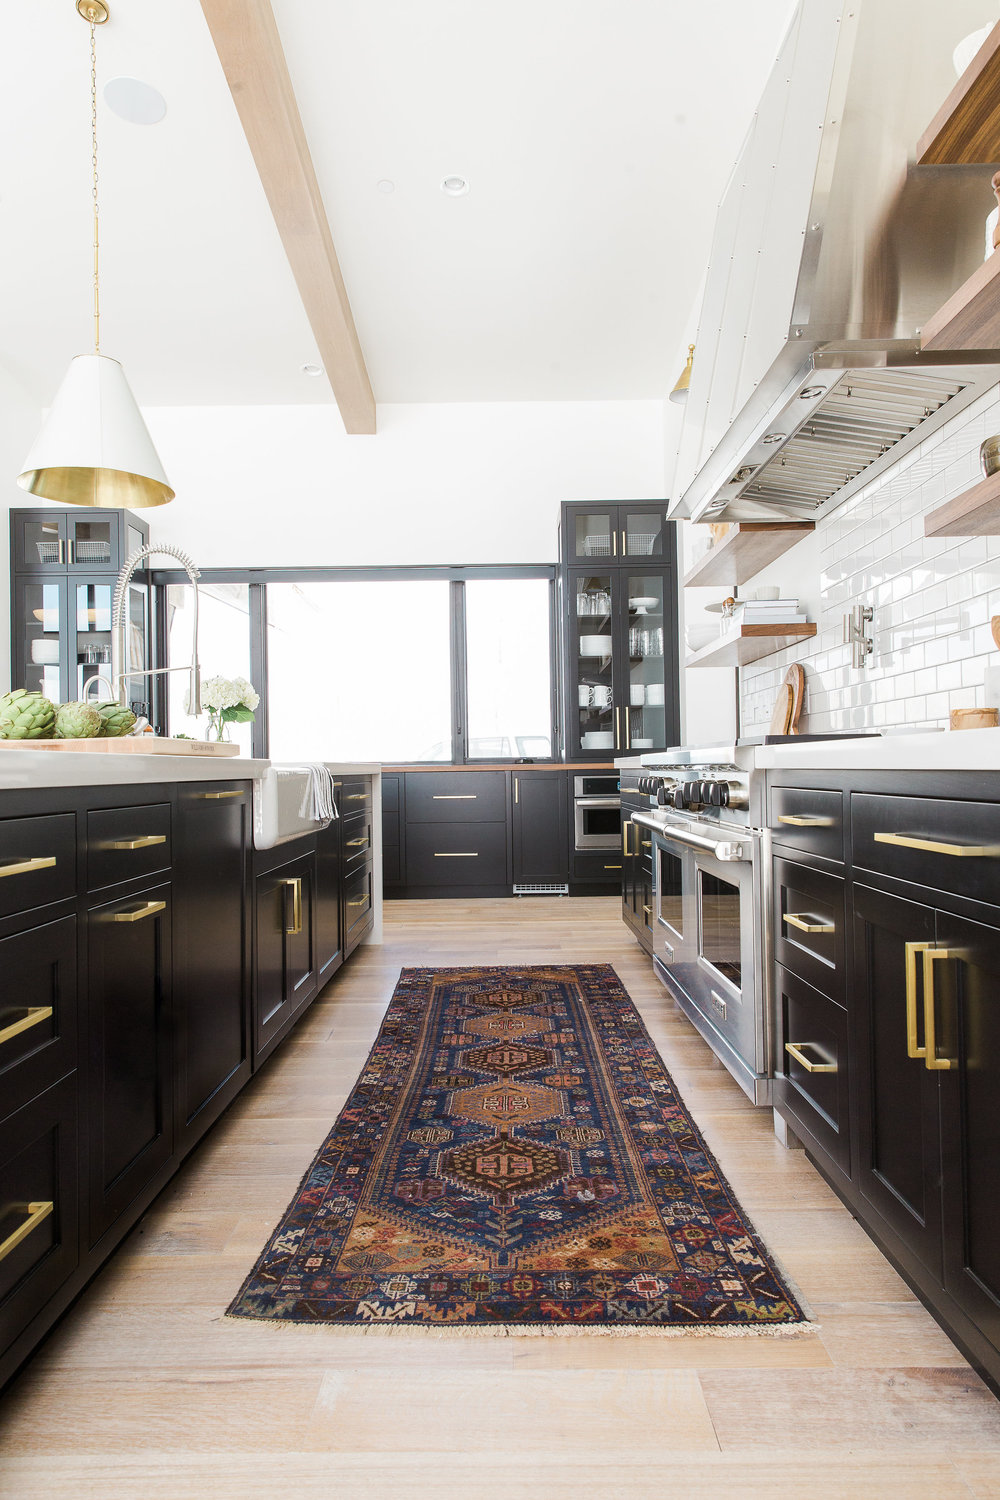 Our Favorite Kitchens with Black Cabinets